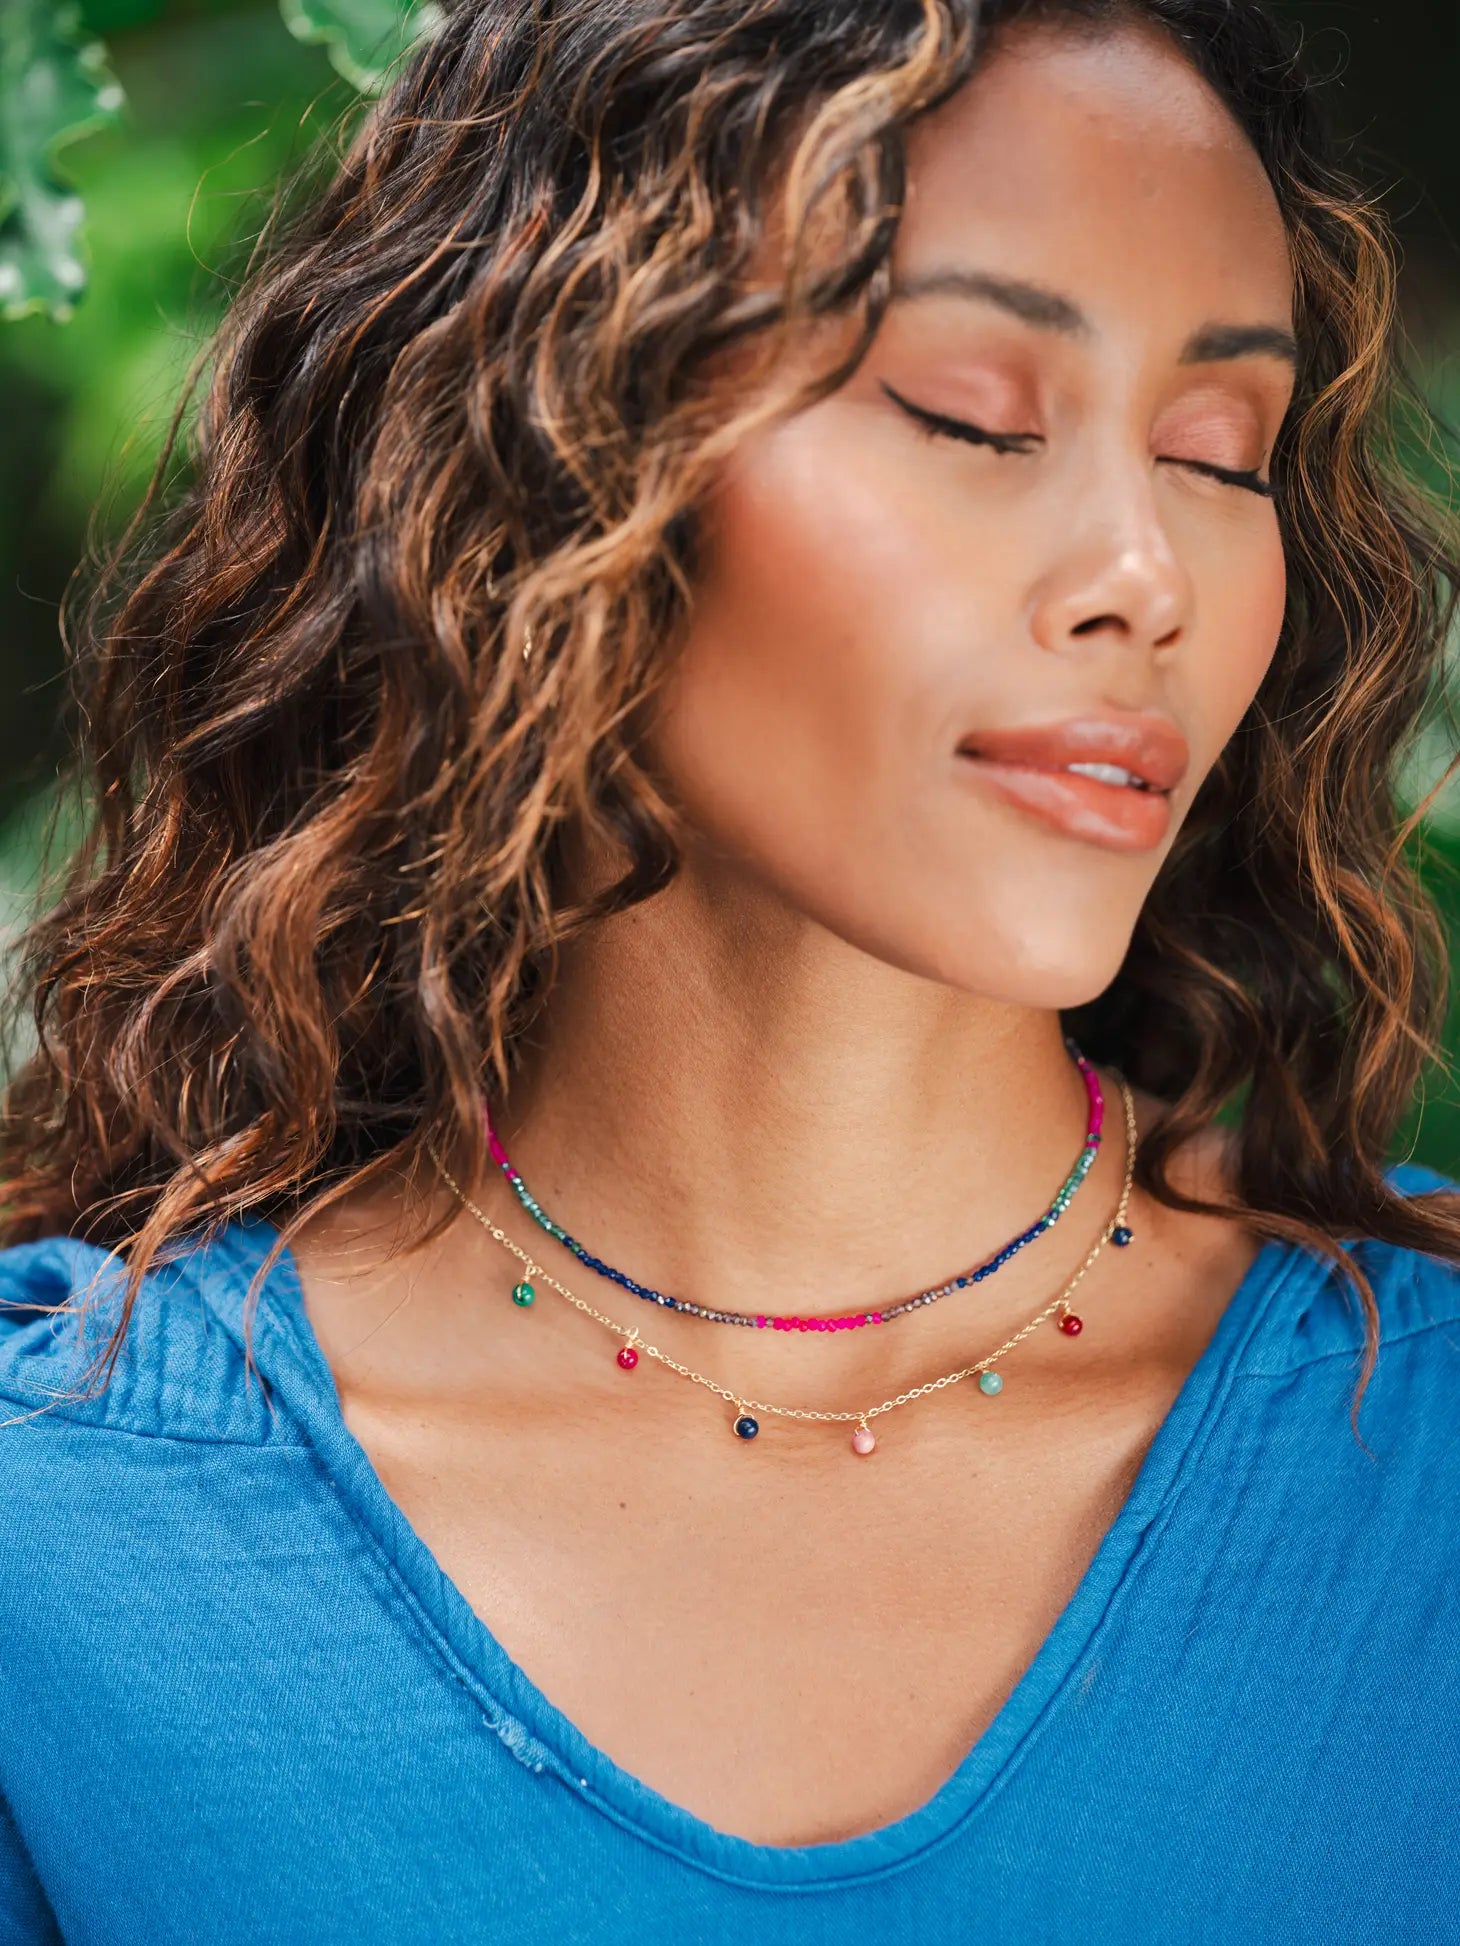 "I Create My Own Path and Walk It with Joy" Goddess Necklace